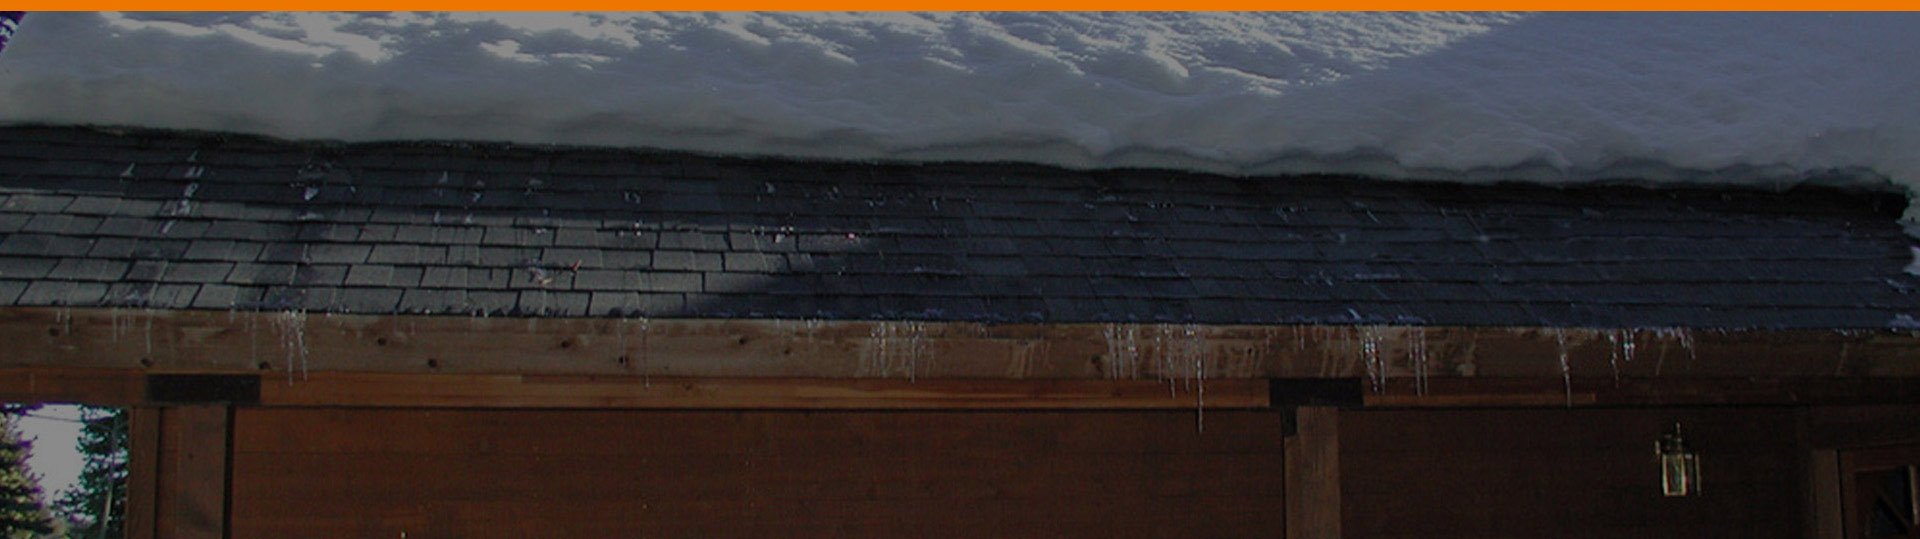 Best roof de-icing - frequently asked questions